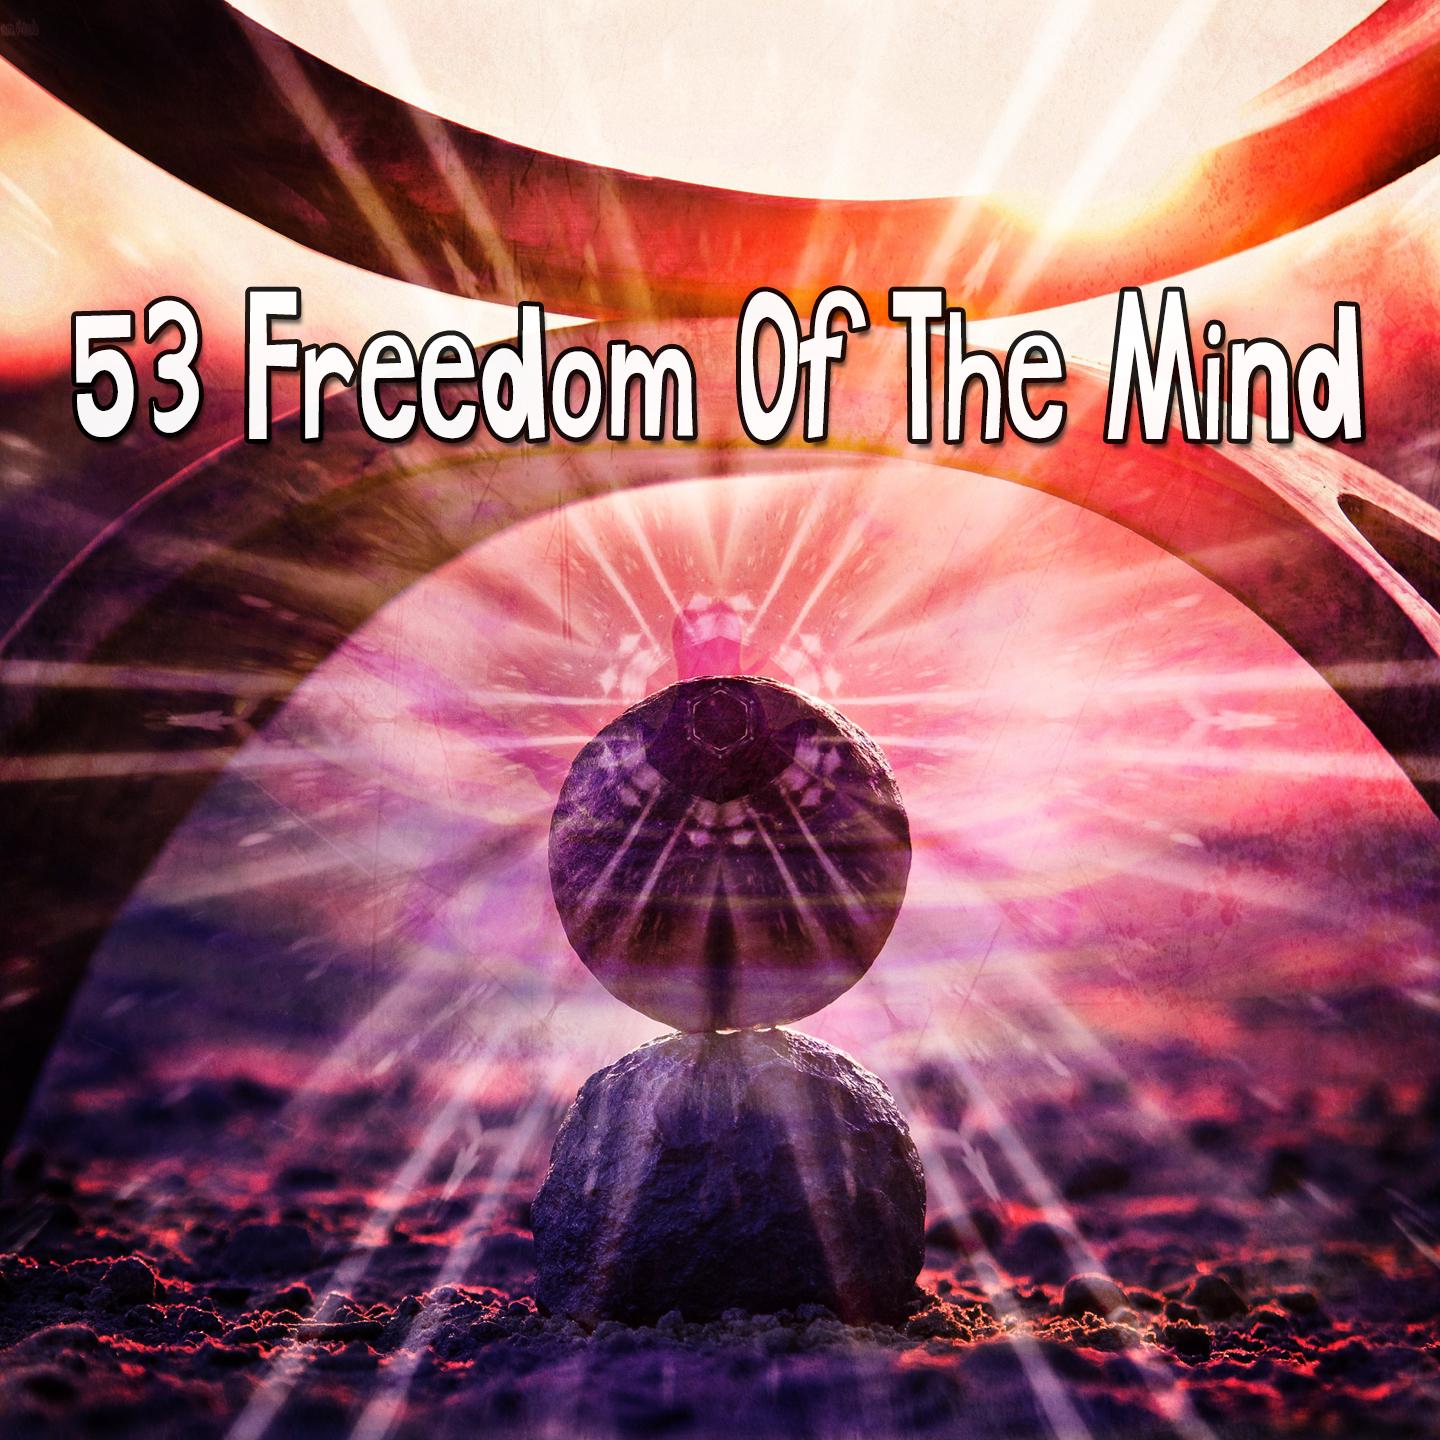 53 Freedom Of The Mind